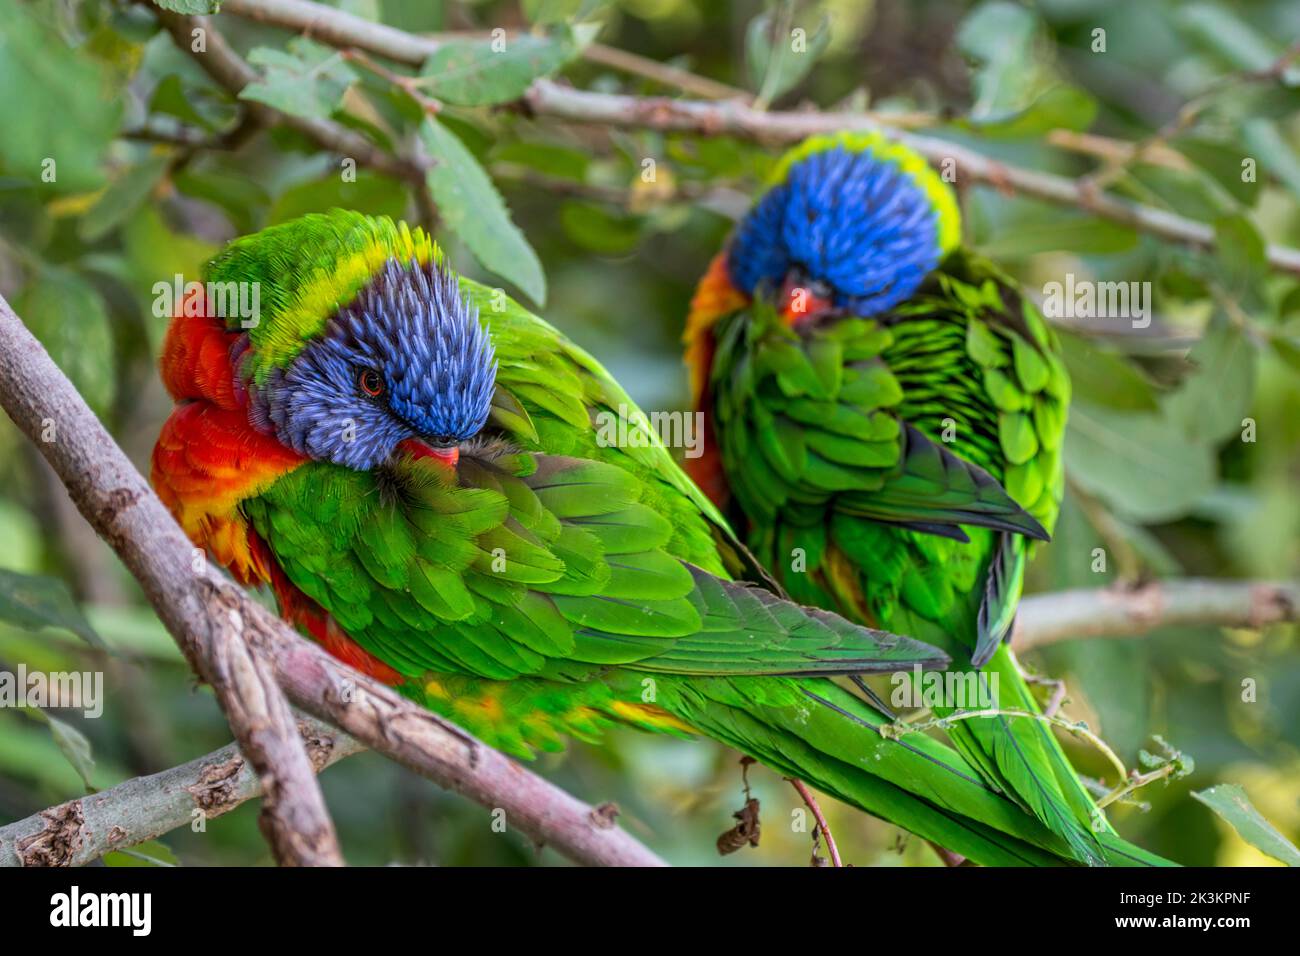 Two rainbow lorikeets (Trichoglossus moluccanus) resting in tree, species of parrot native to Australia Stock Photo